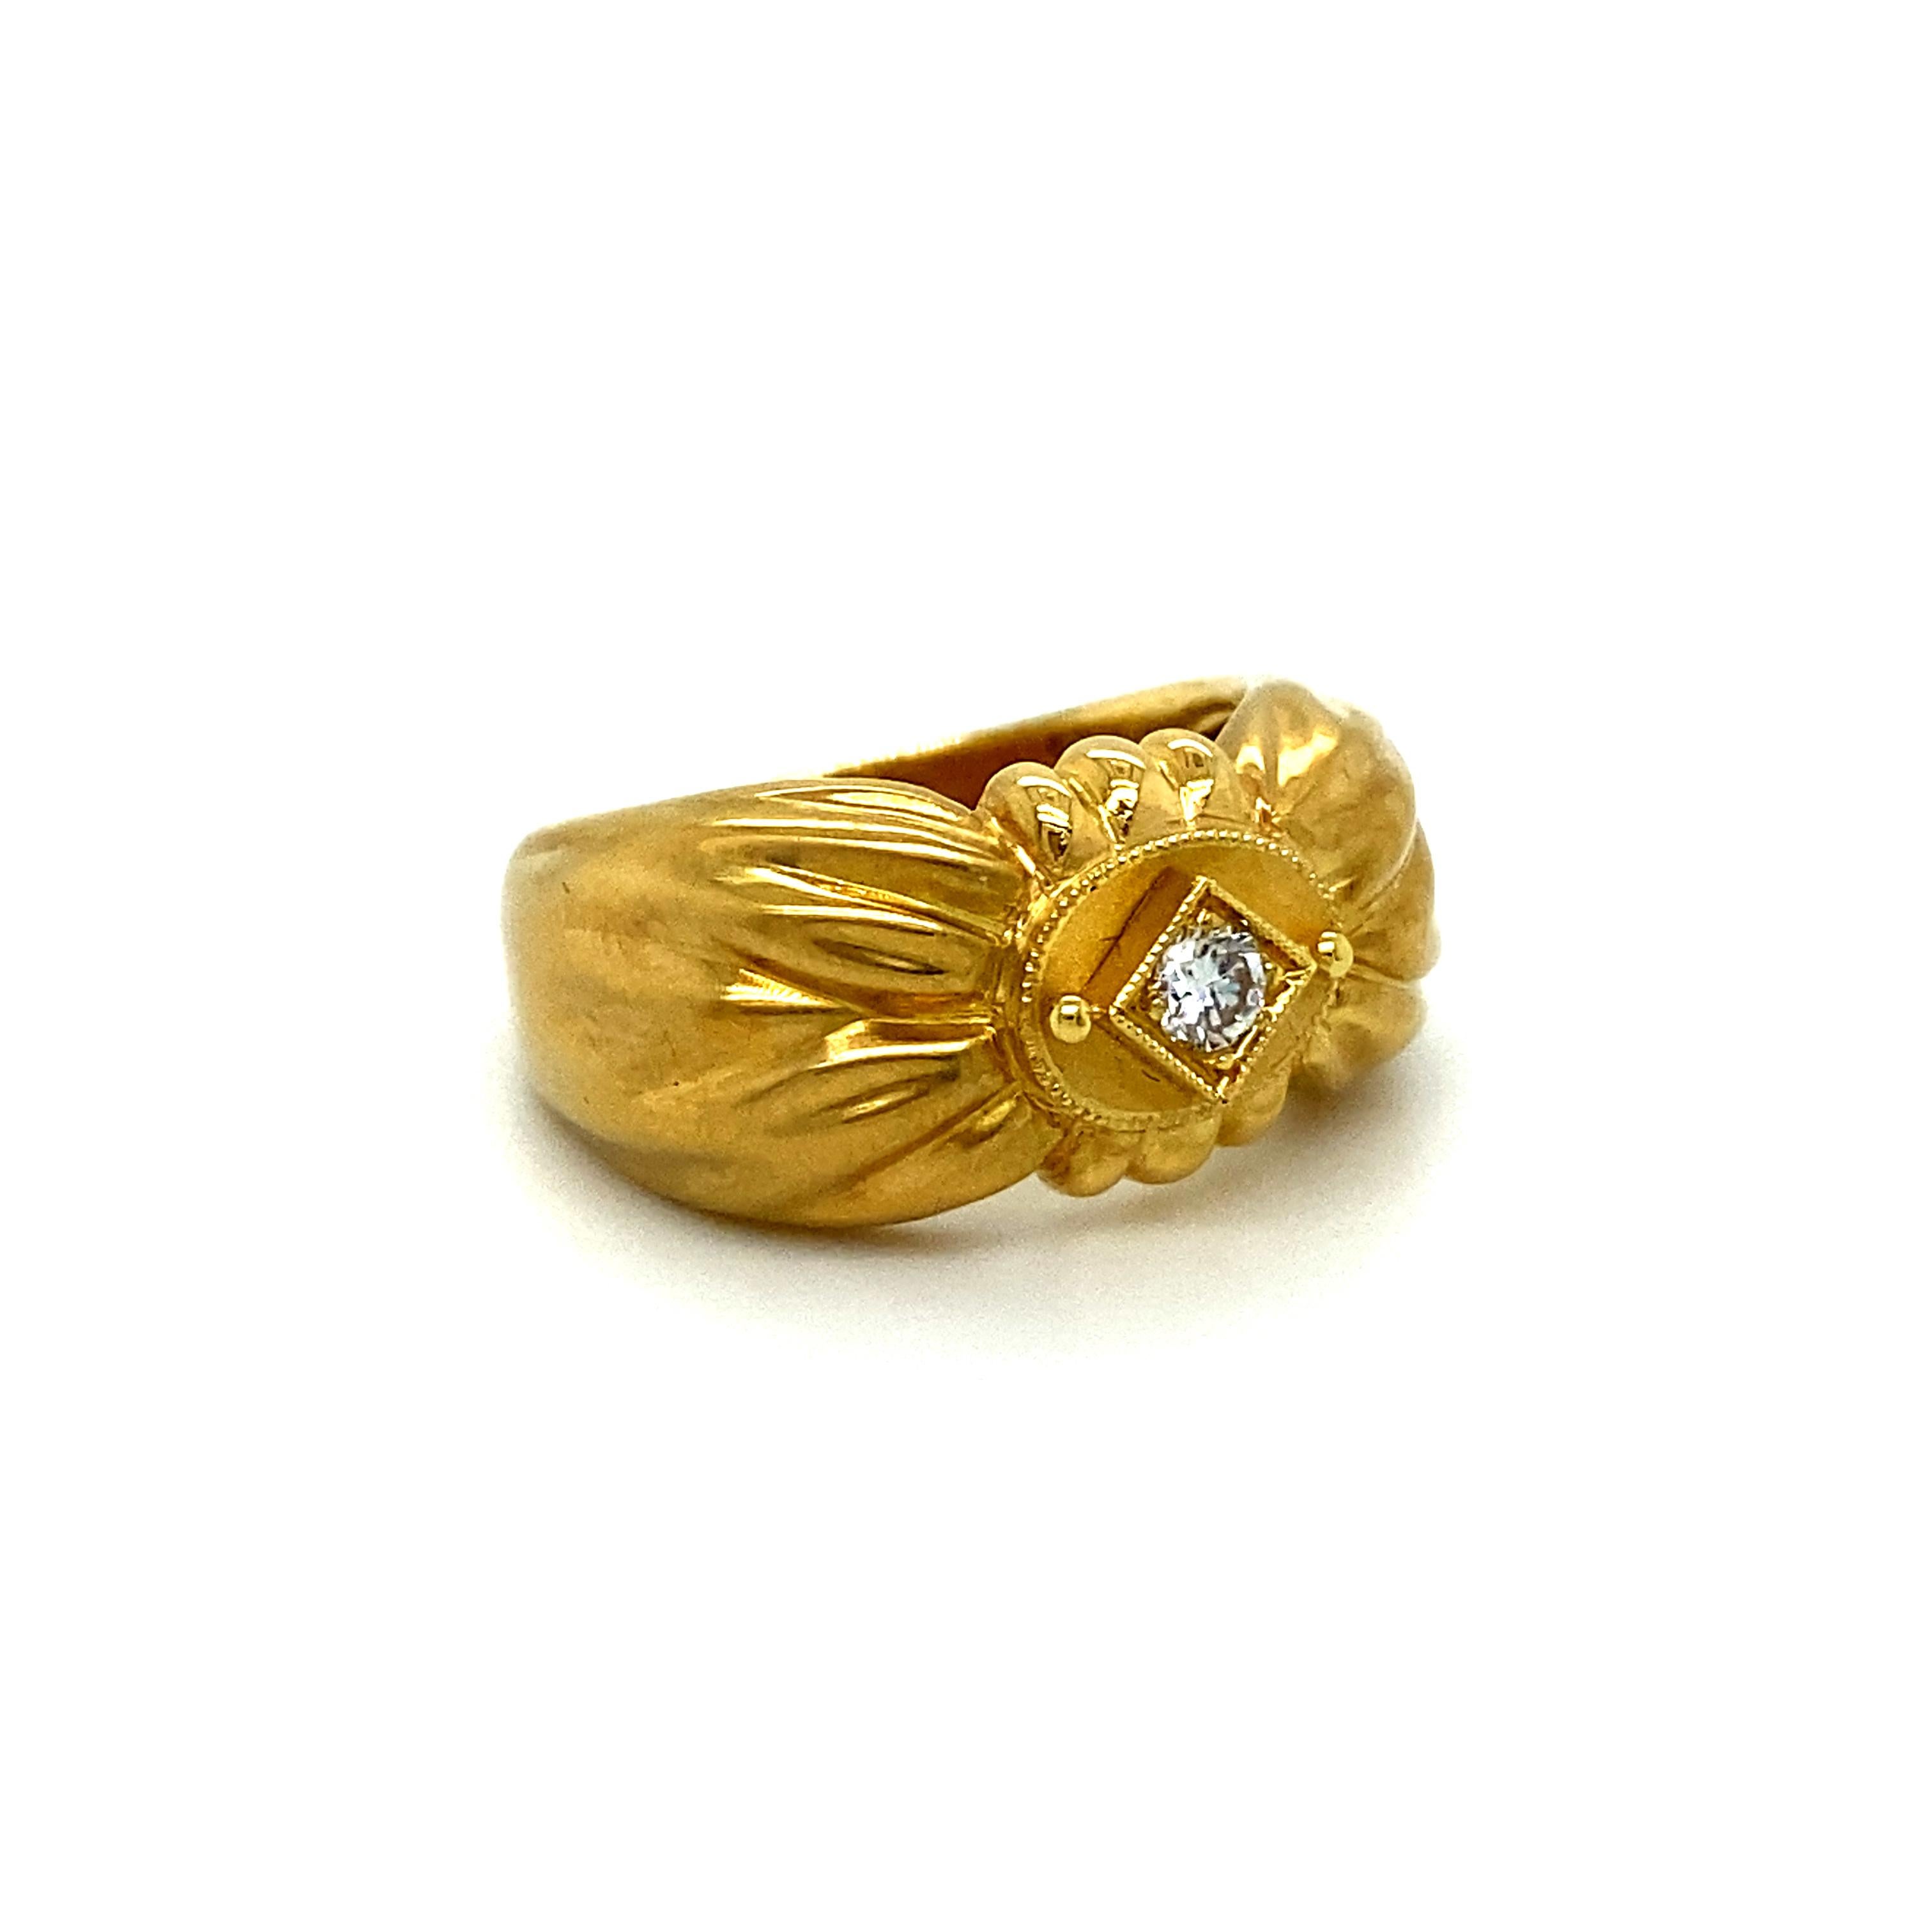 This Awesome Vintage Diamond Bow Ring has so much style, I just can't stop looking at it! Crafted in 18K Yellow Gold, the design features a heavy 80's style bow with a diamond center! In the center, the ring hold a Round Brilliant Cut Diamond,